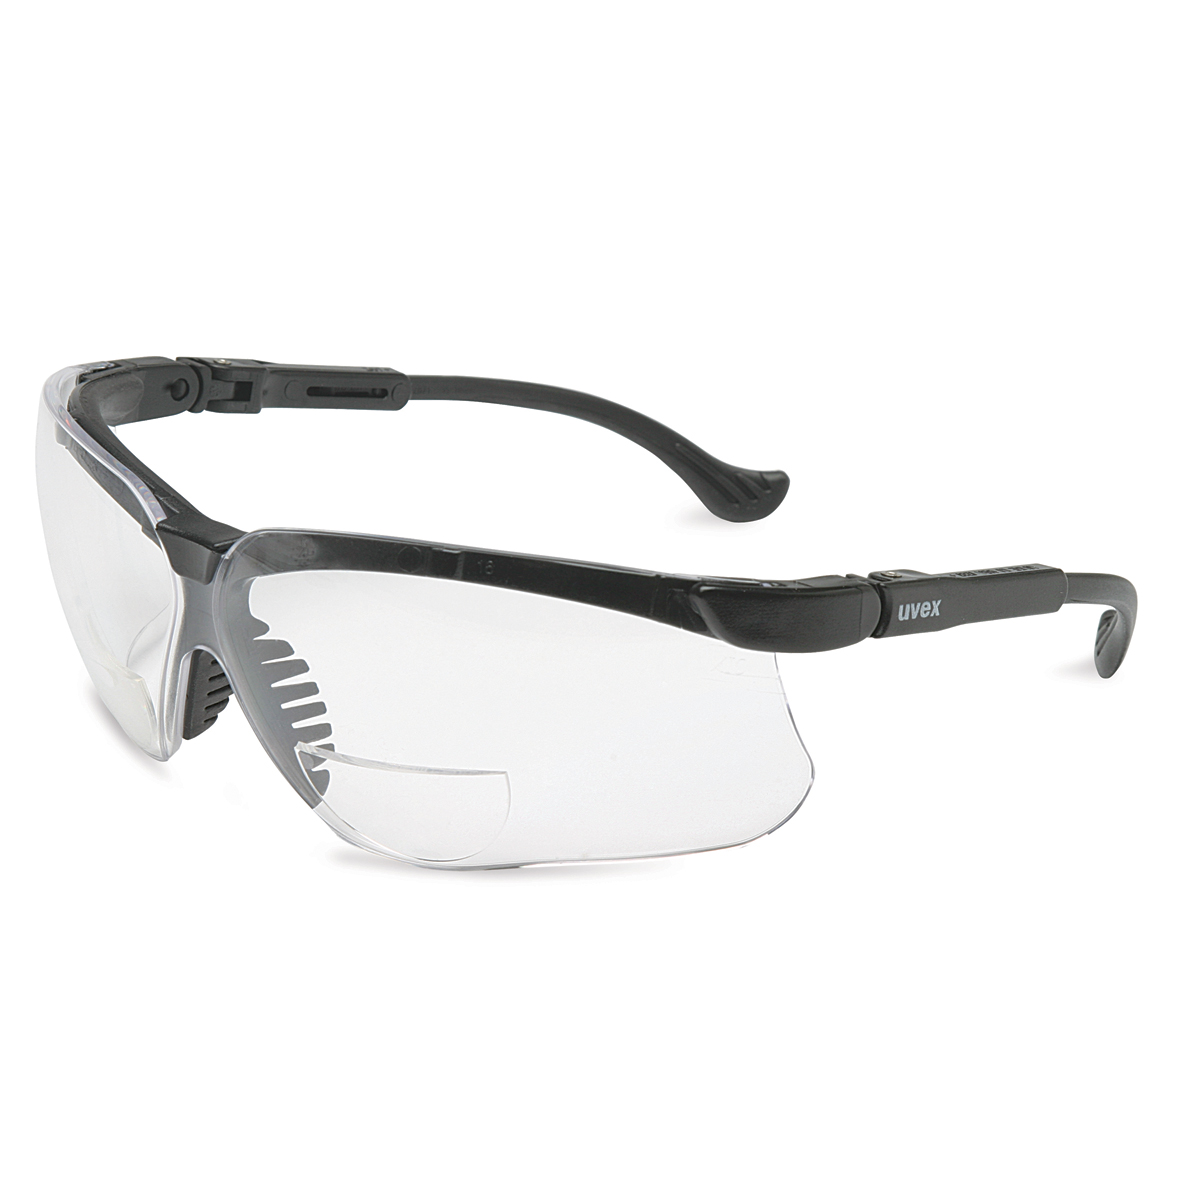 Airgas Link3117 150 Lincoln Electric Bifocal 1 5 Diopter Clear And Black Safety Glasses With Clear Polycarbonate Anti Scratch Lens Availability Restrictions Apply